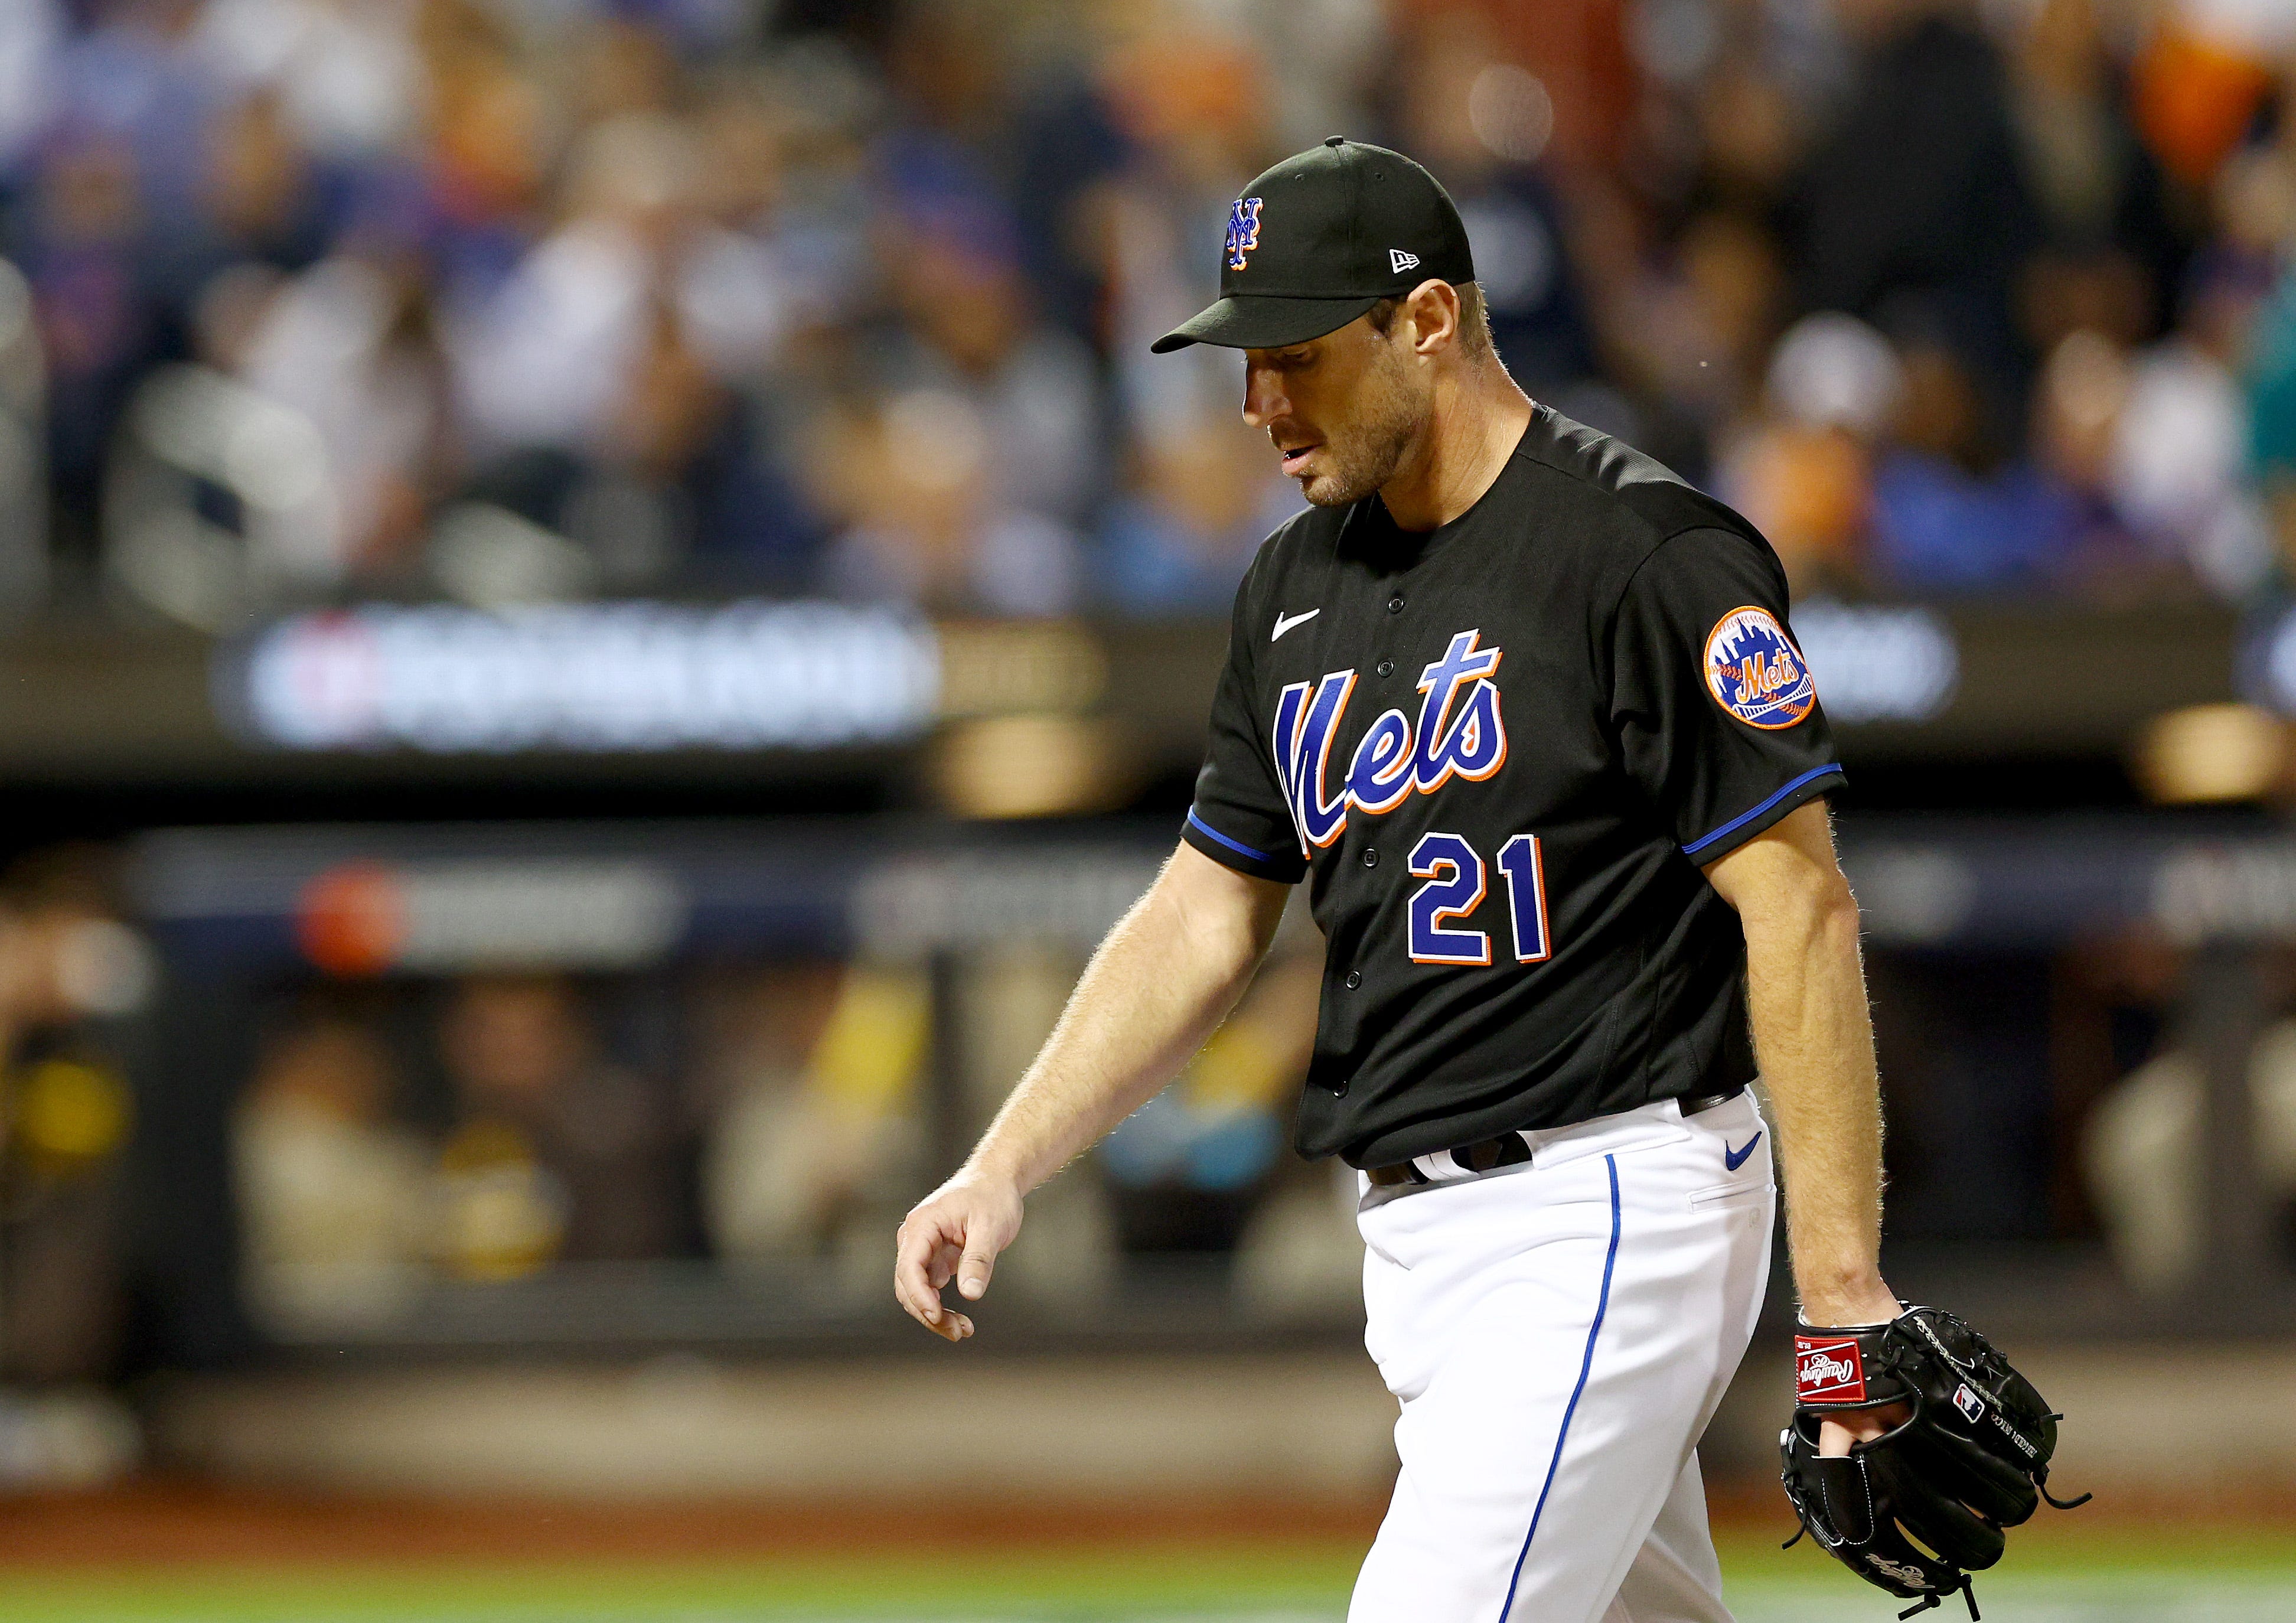 Mets Editorial: Once again, the Mets are an embarrassment - Amazin